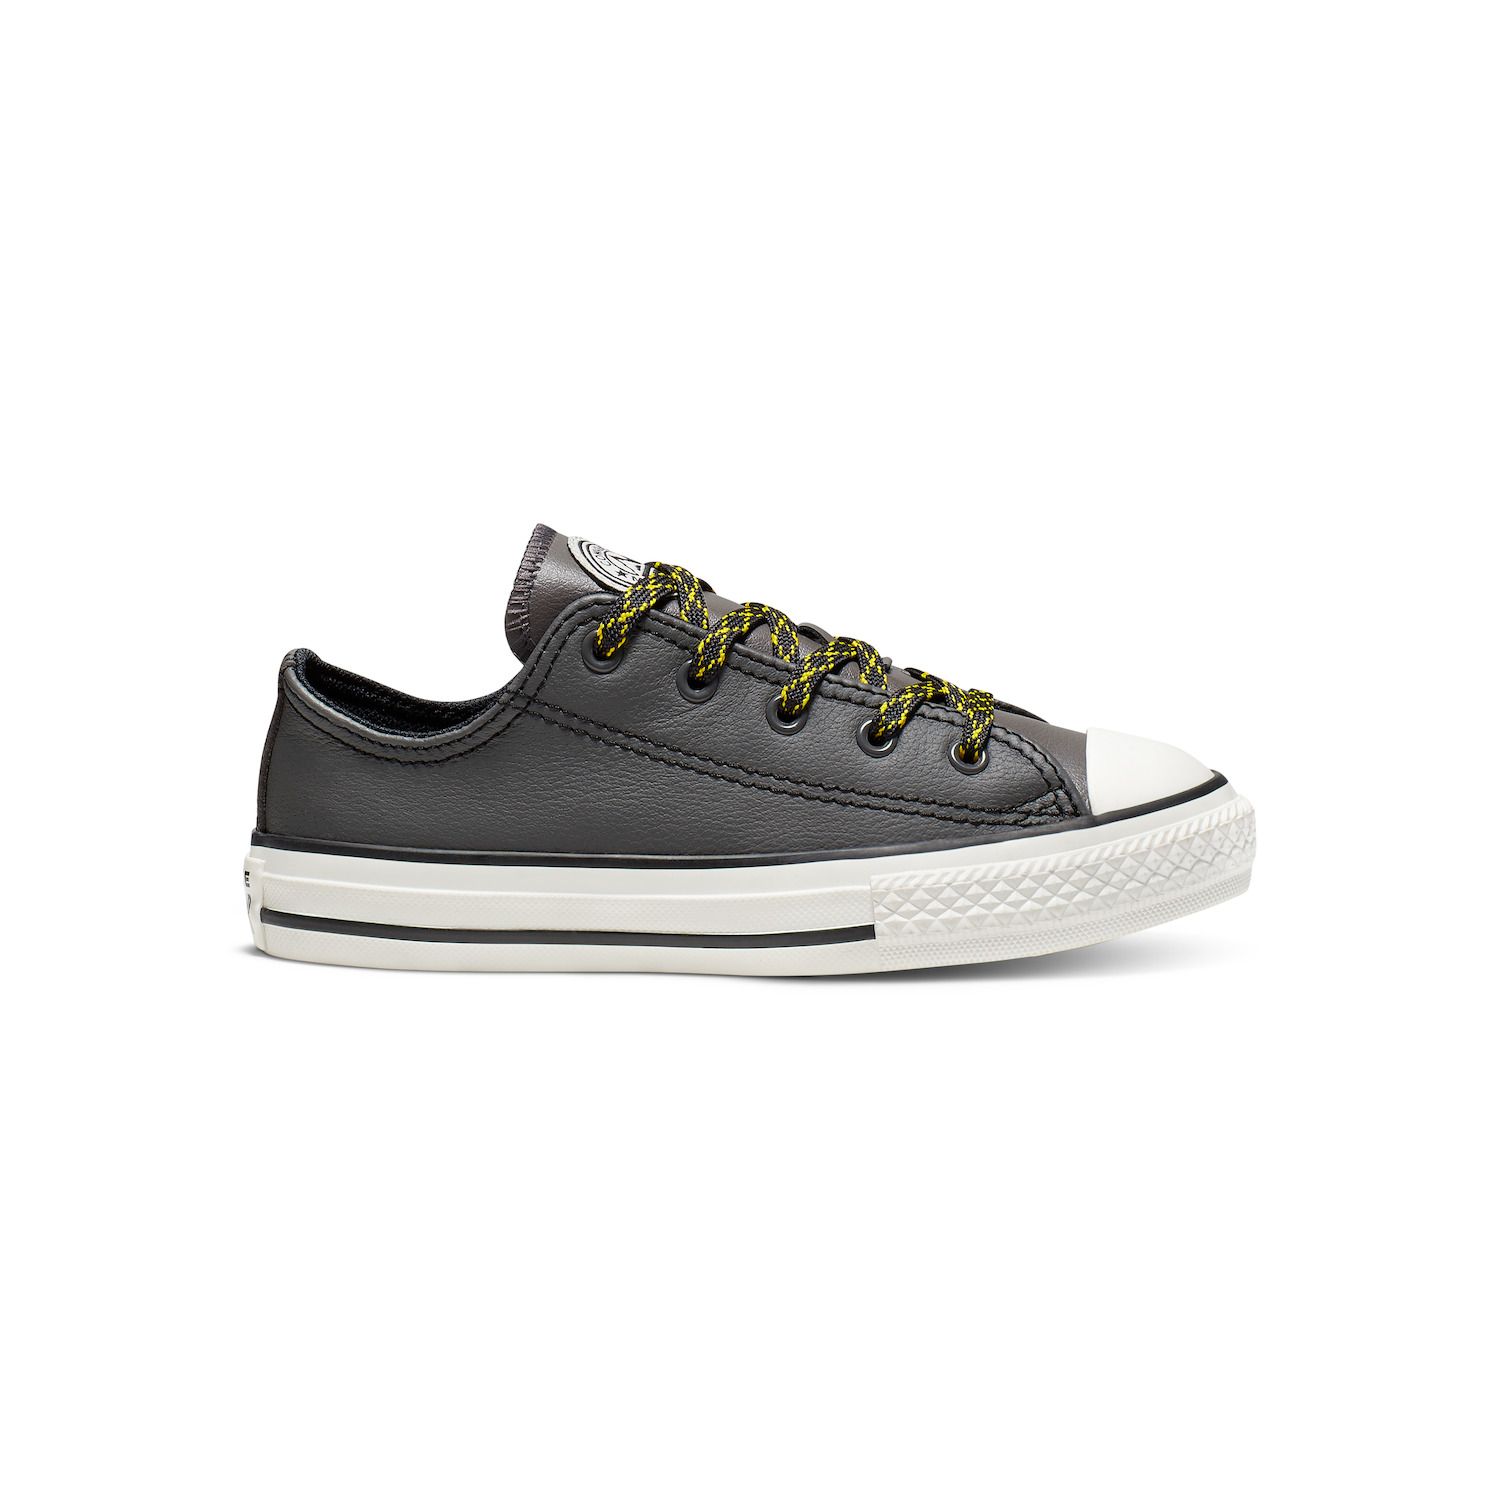 converse all star tumbled leather